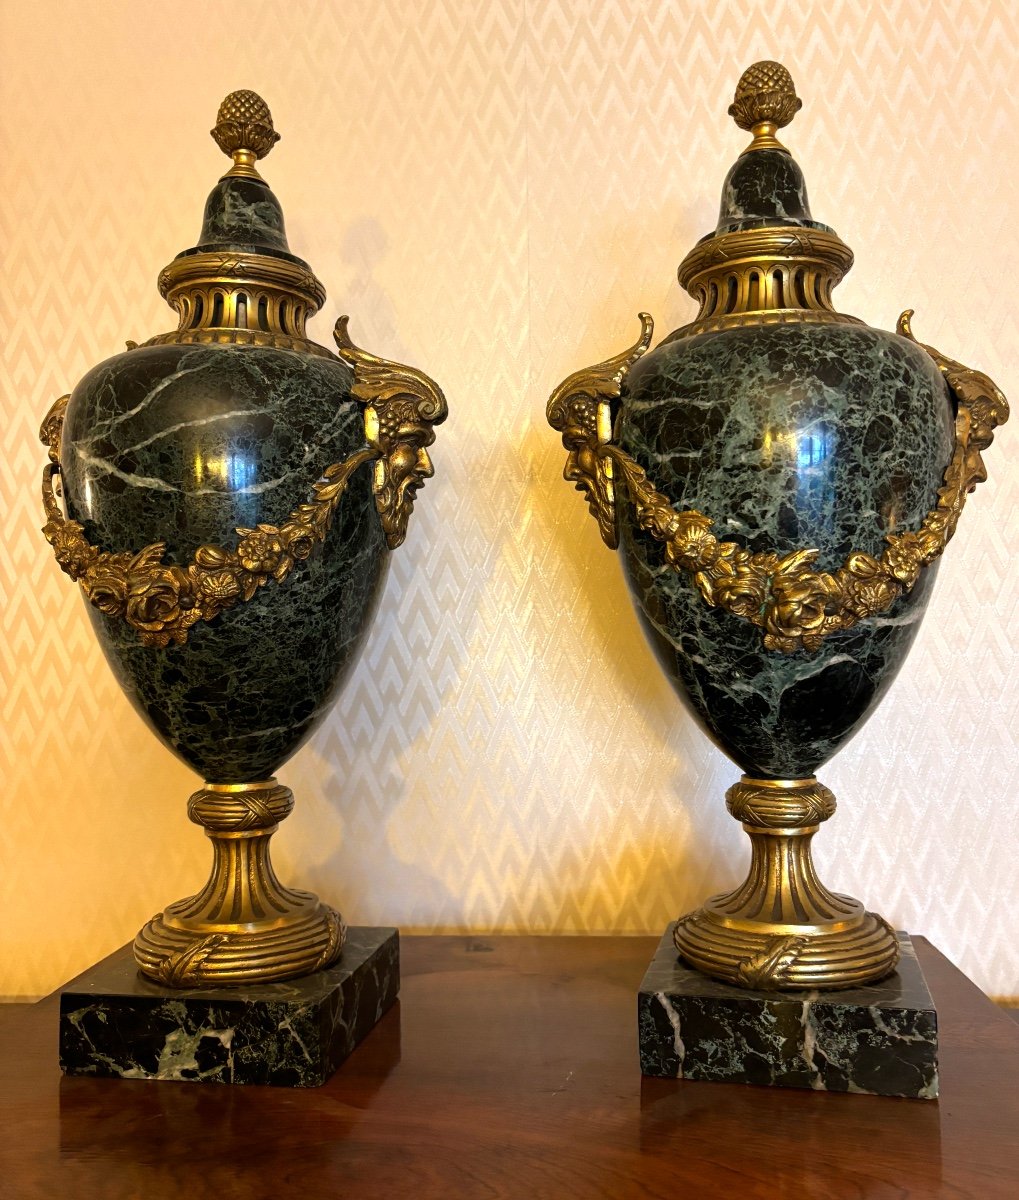 Old Pair Of Cassolette Pots Covered In Alpine Green Marble And Bronze, 1920 Period Approx.